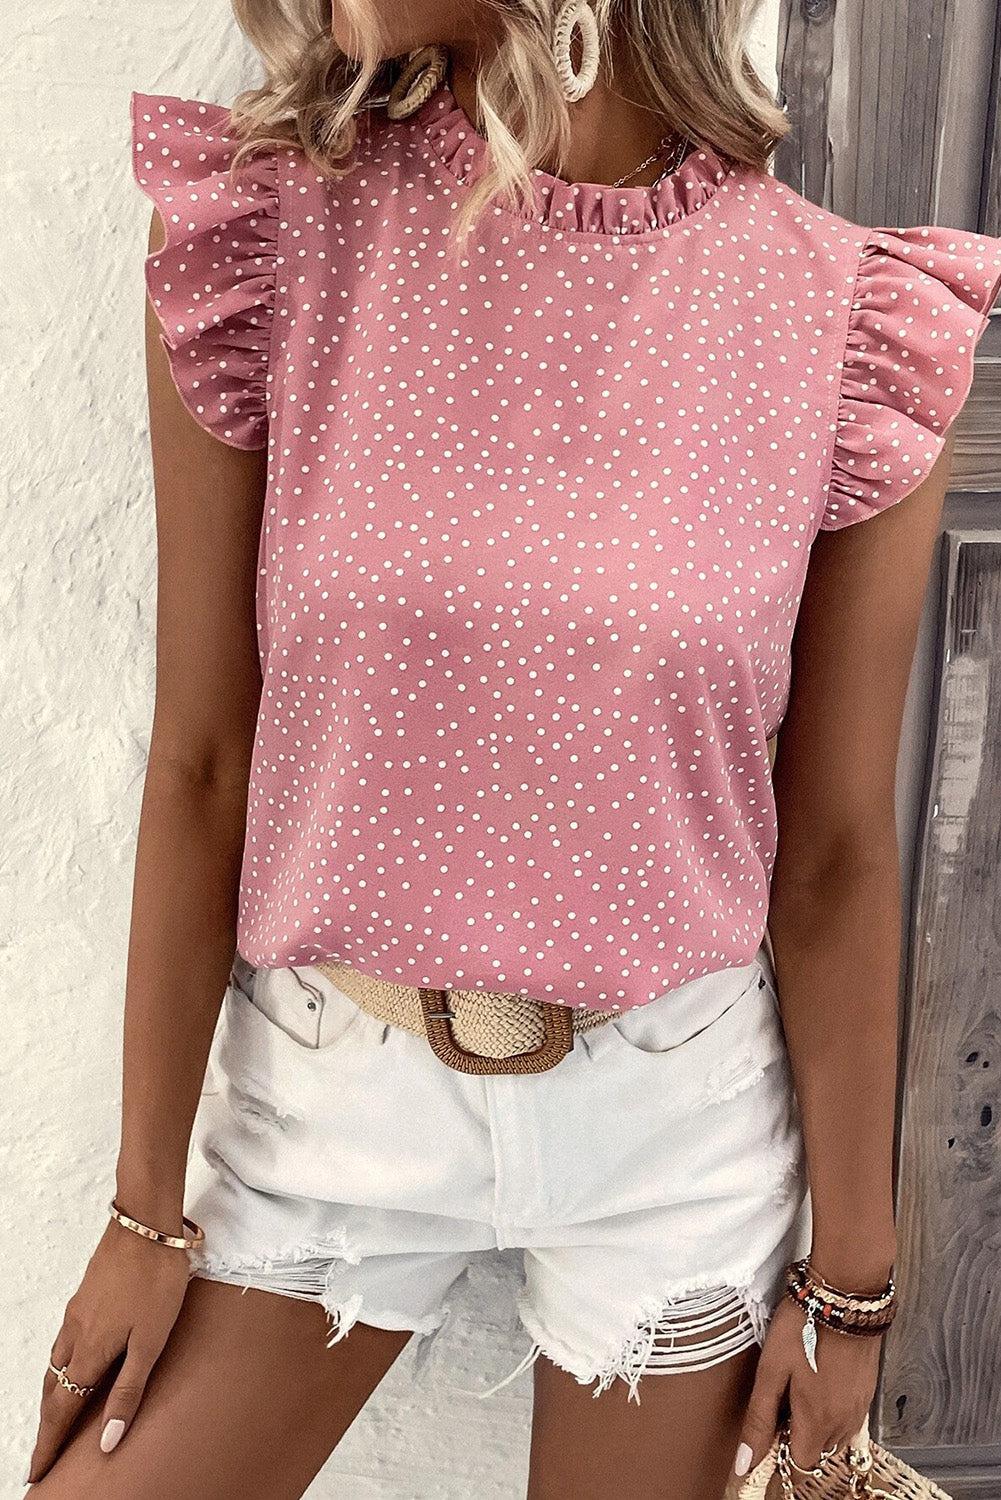 a woman wearing a pink top with white polka dots